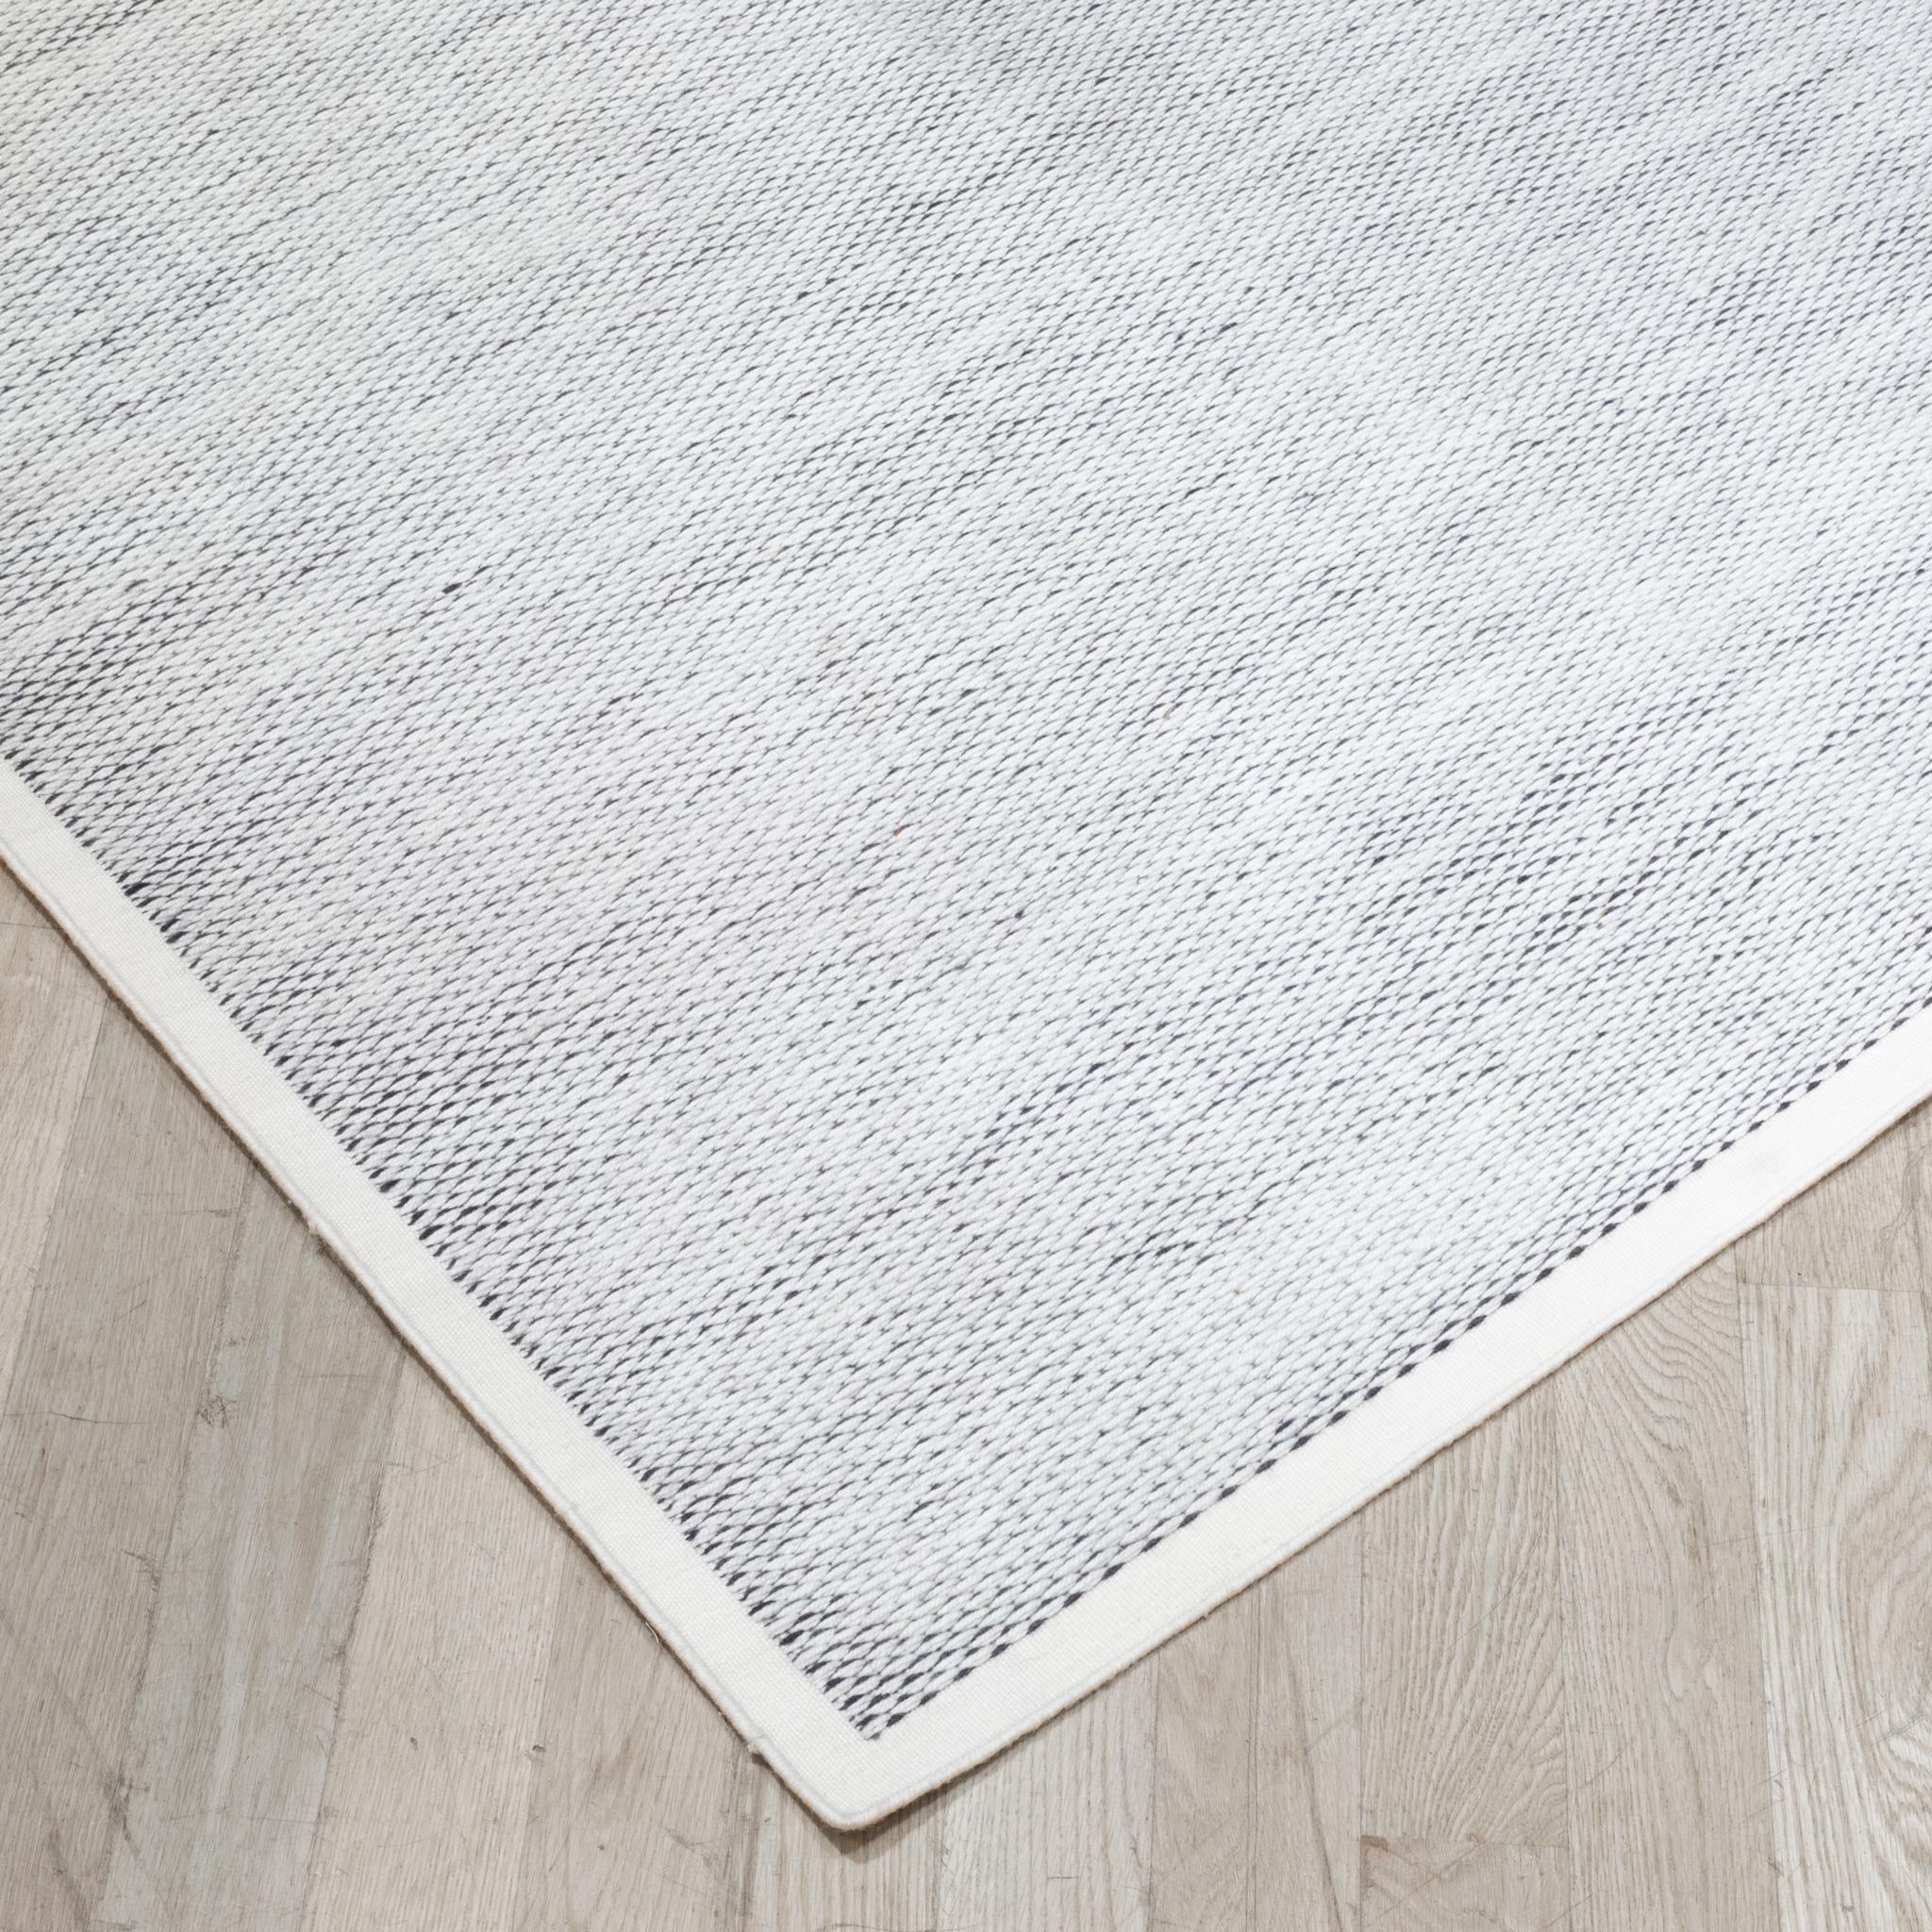 Hand-Woven 100% Merino Wool Lyxx Area Rug by Fells Andes 5' x 7' (FREE SHIPPING) For Sale